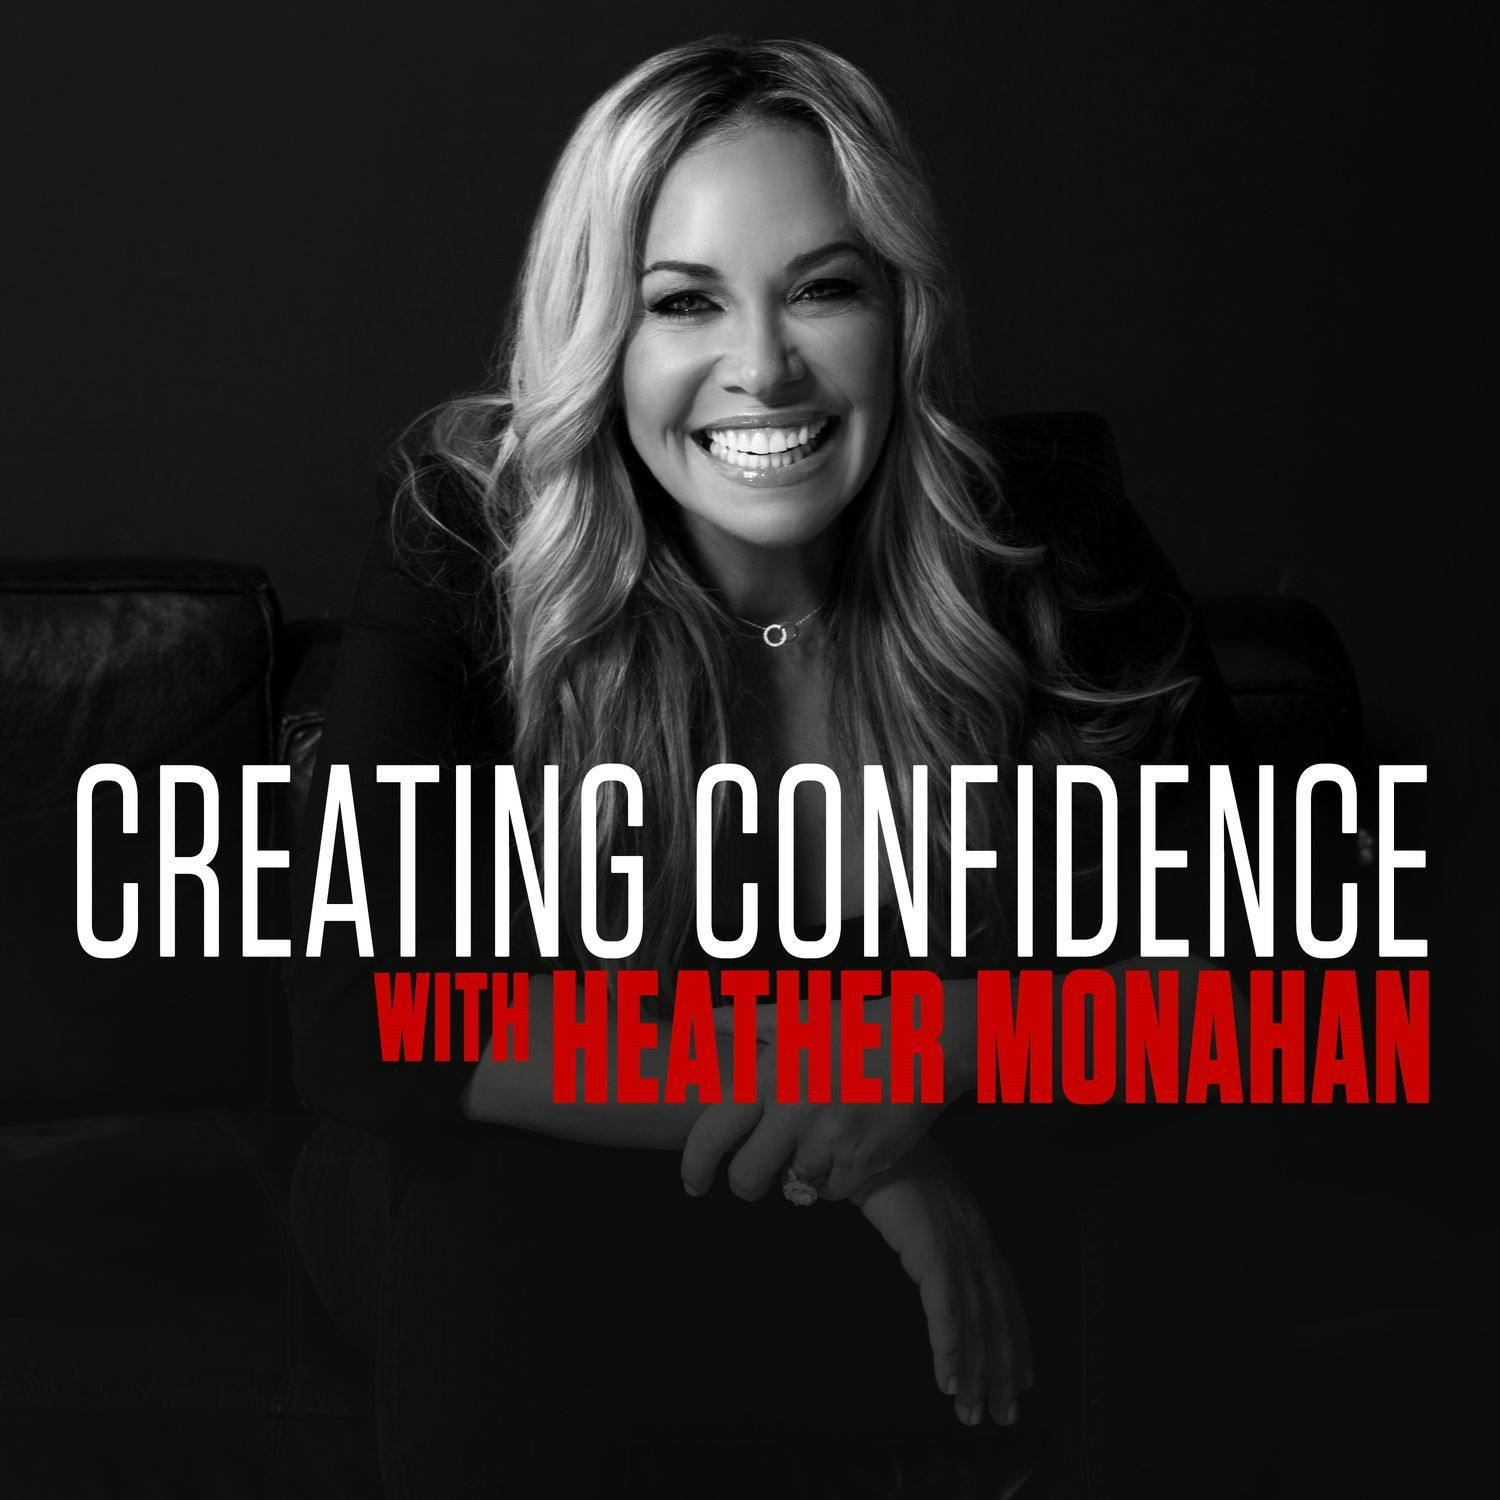 #202: START Vibrating on a Higher Frequency With Heather! by Heather Monahan | YAP Media Network